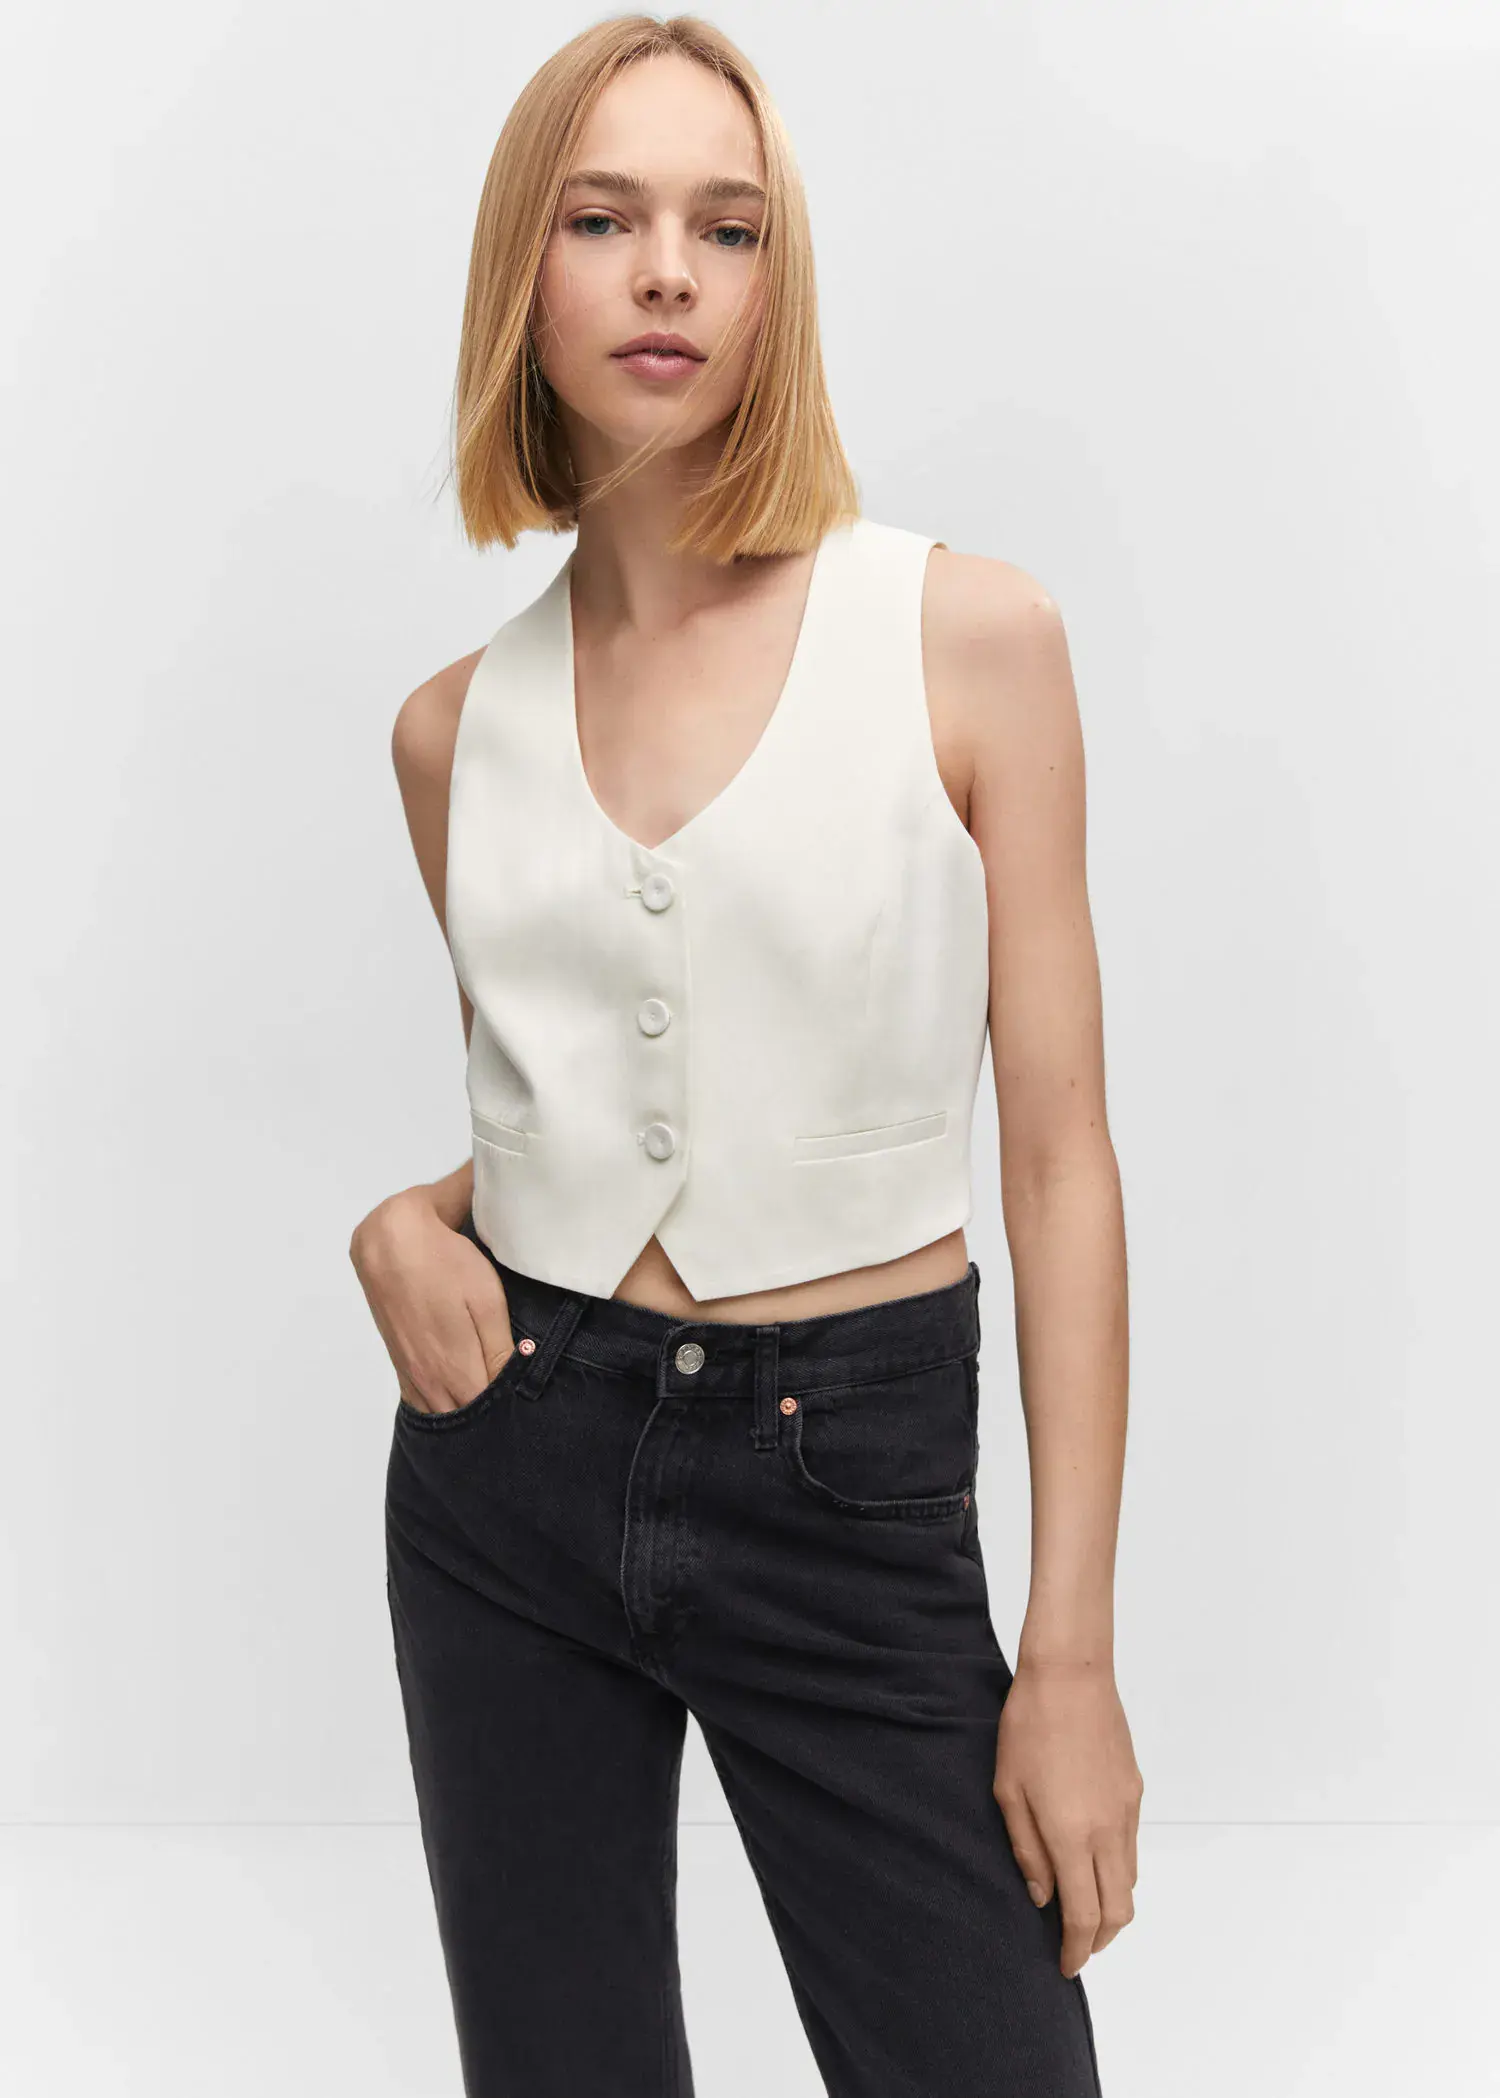 Mango Fitted vest with buttons. a woman wearing a white vest and black jeans. 